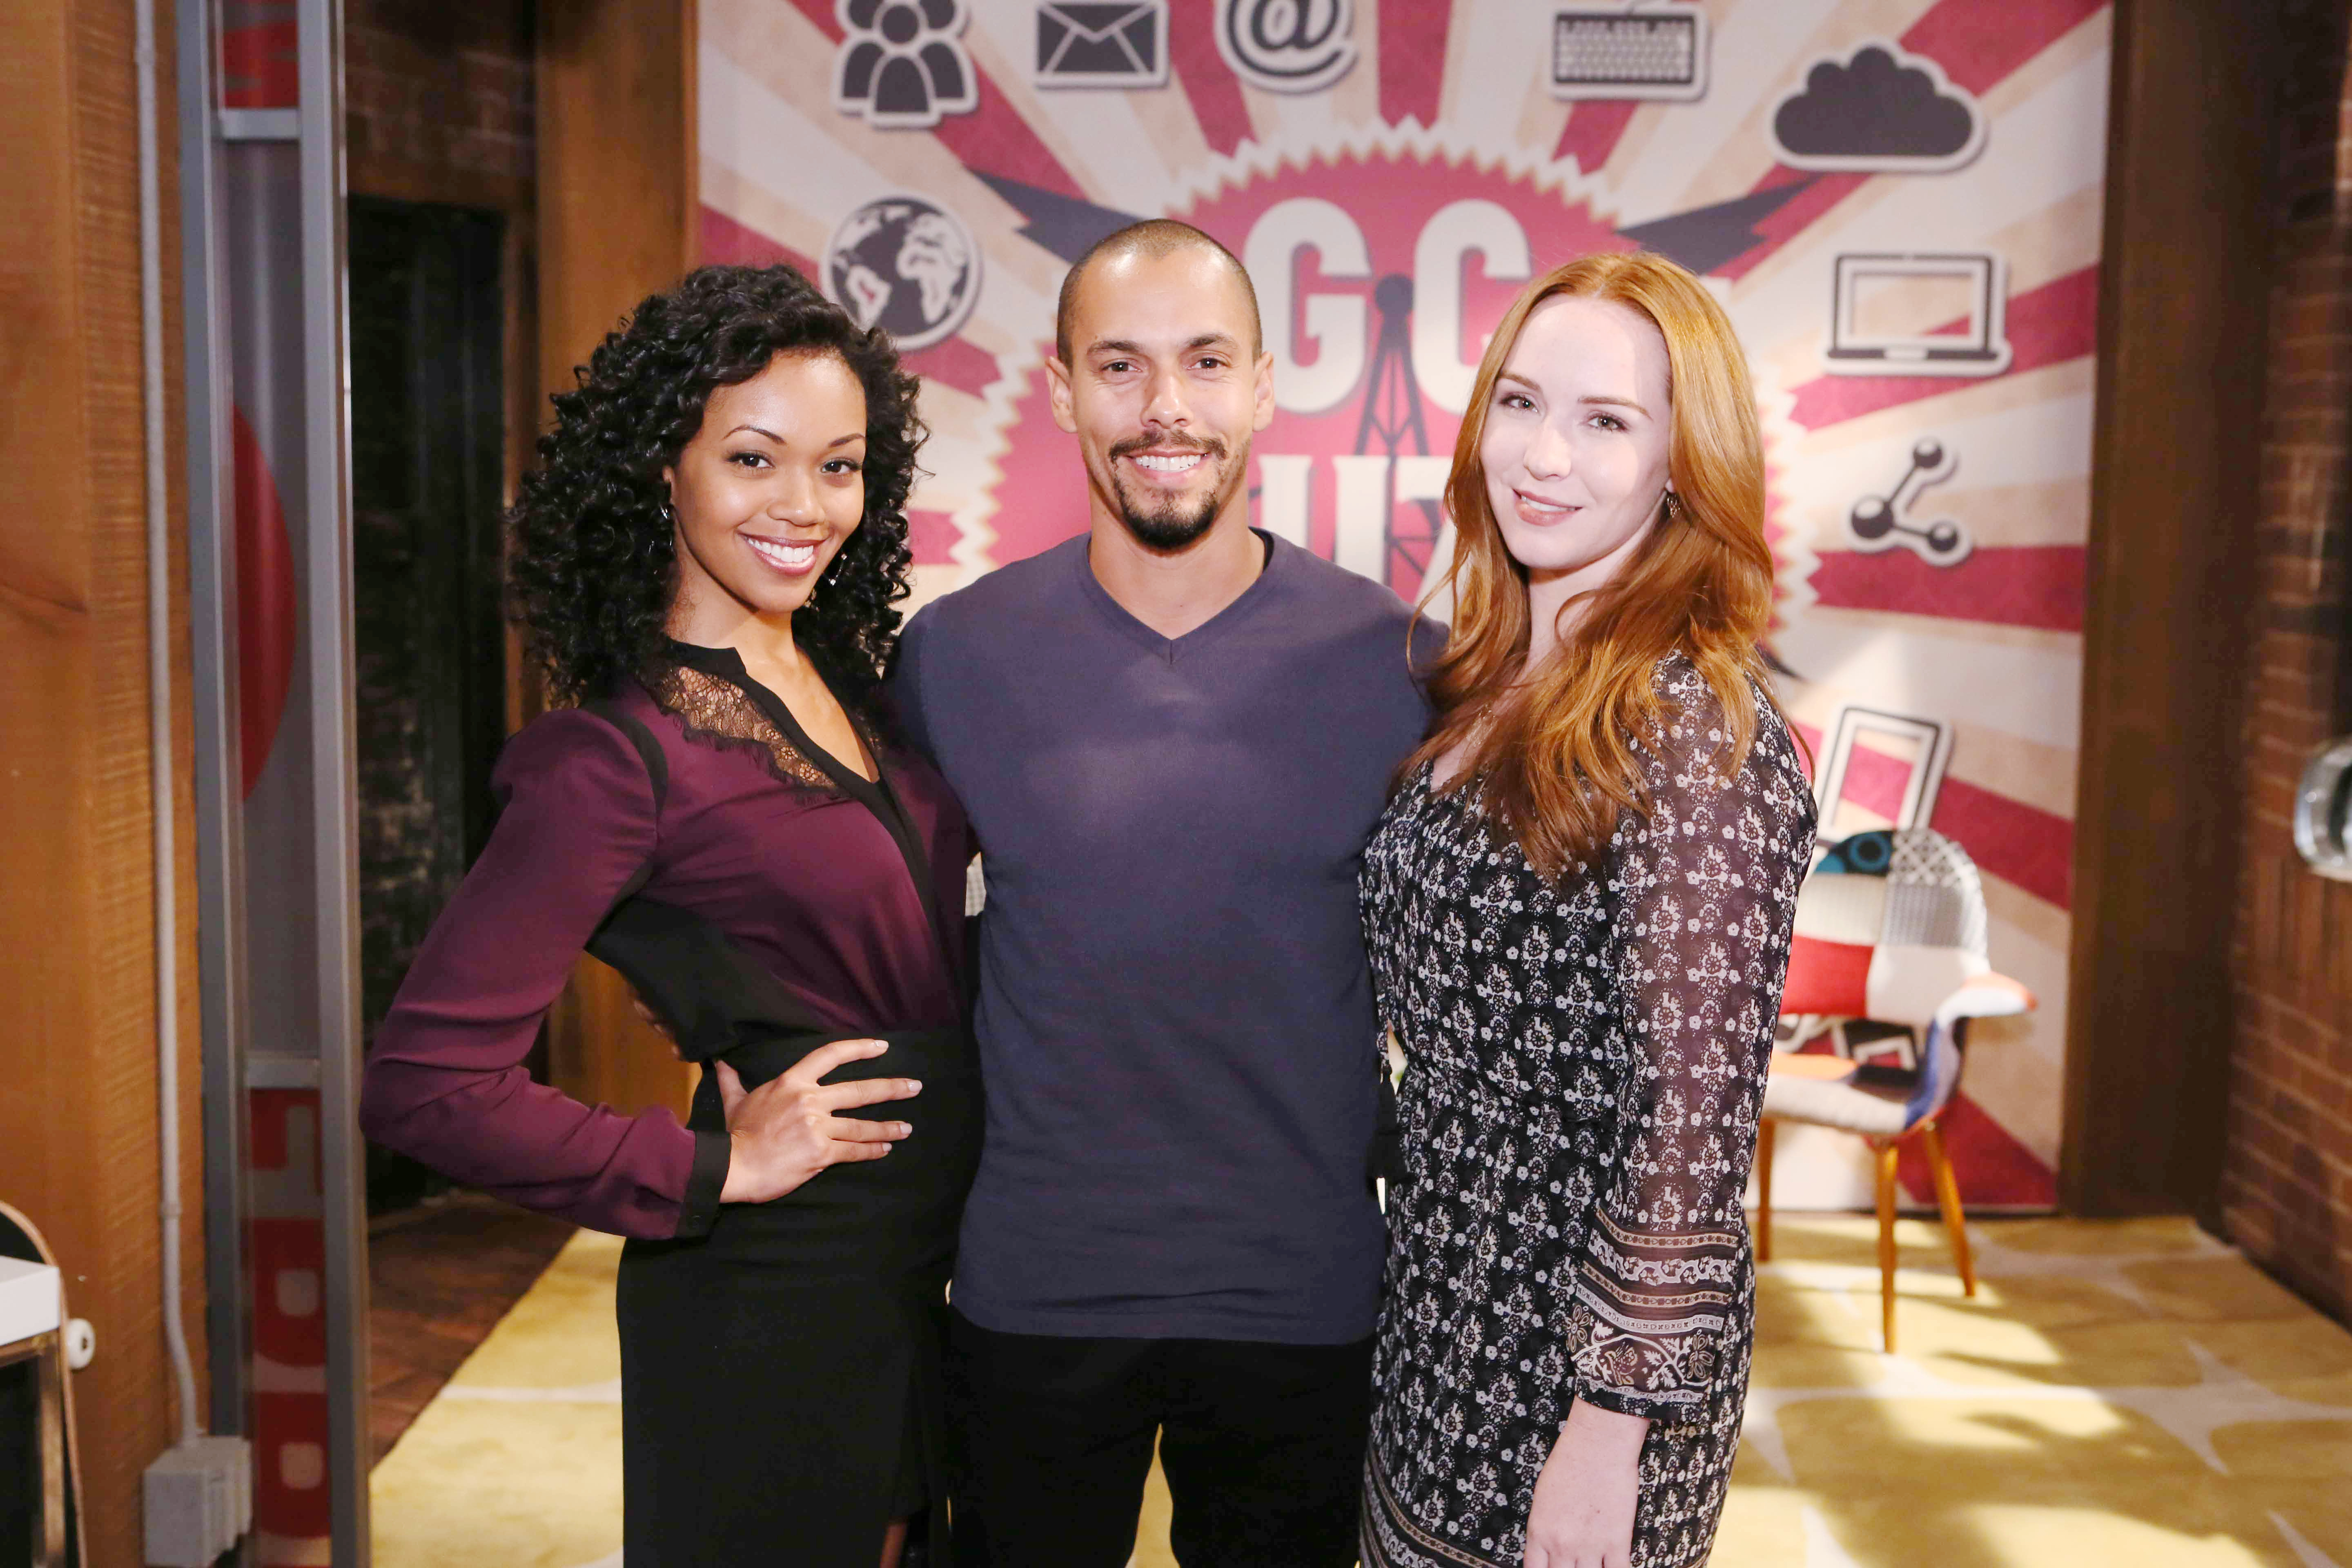 Bryton James, Camryn Grimes, Mishael Morgan "The Young and the Restless" Set  CBS television City Los Angeles 10/13/16 © Howard Wise/jpistudios.com 310-657-9661